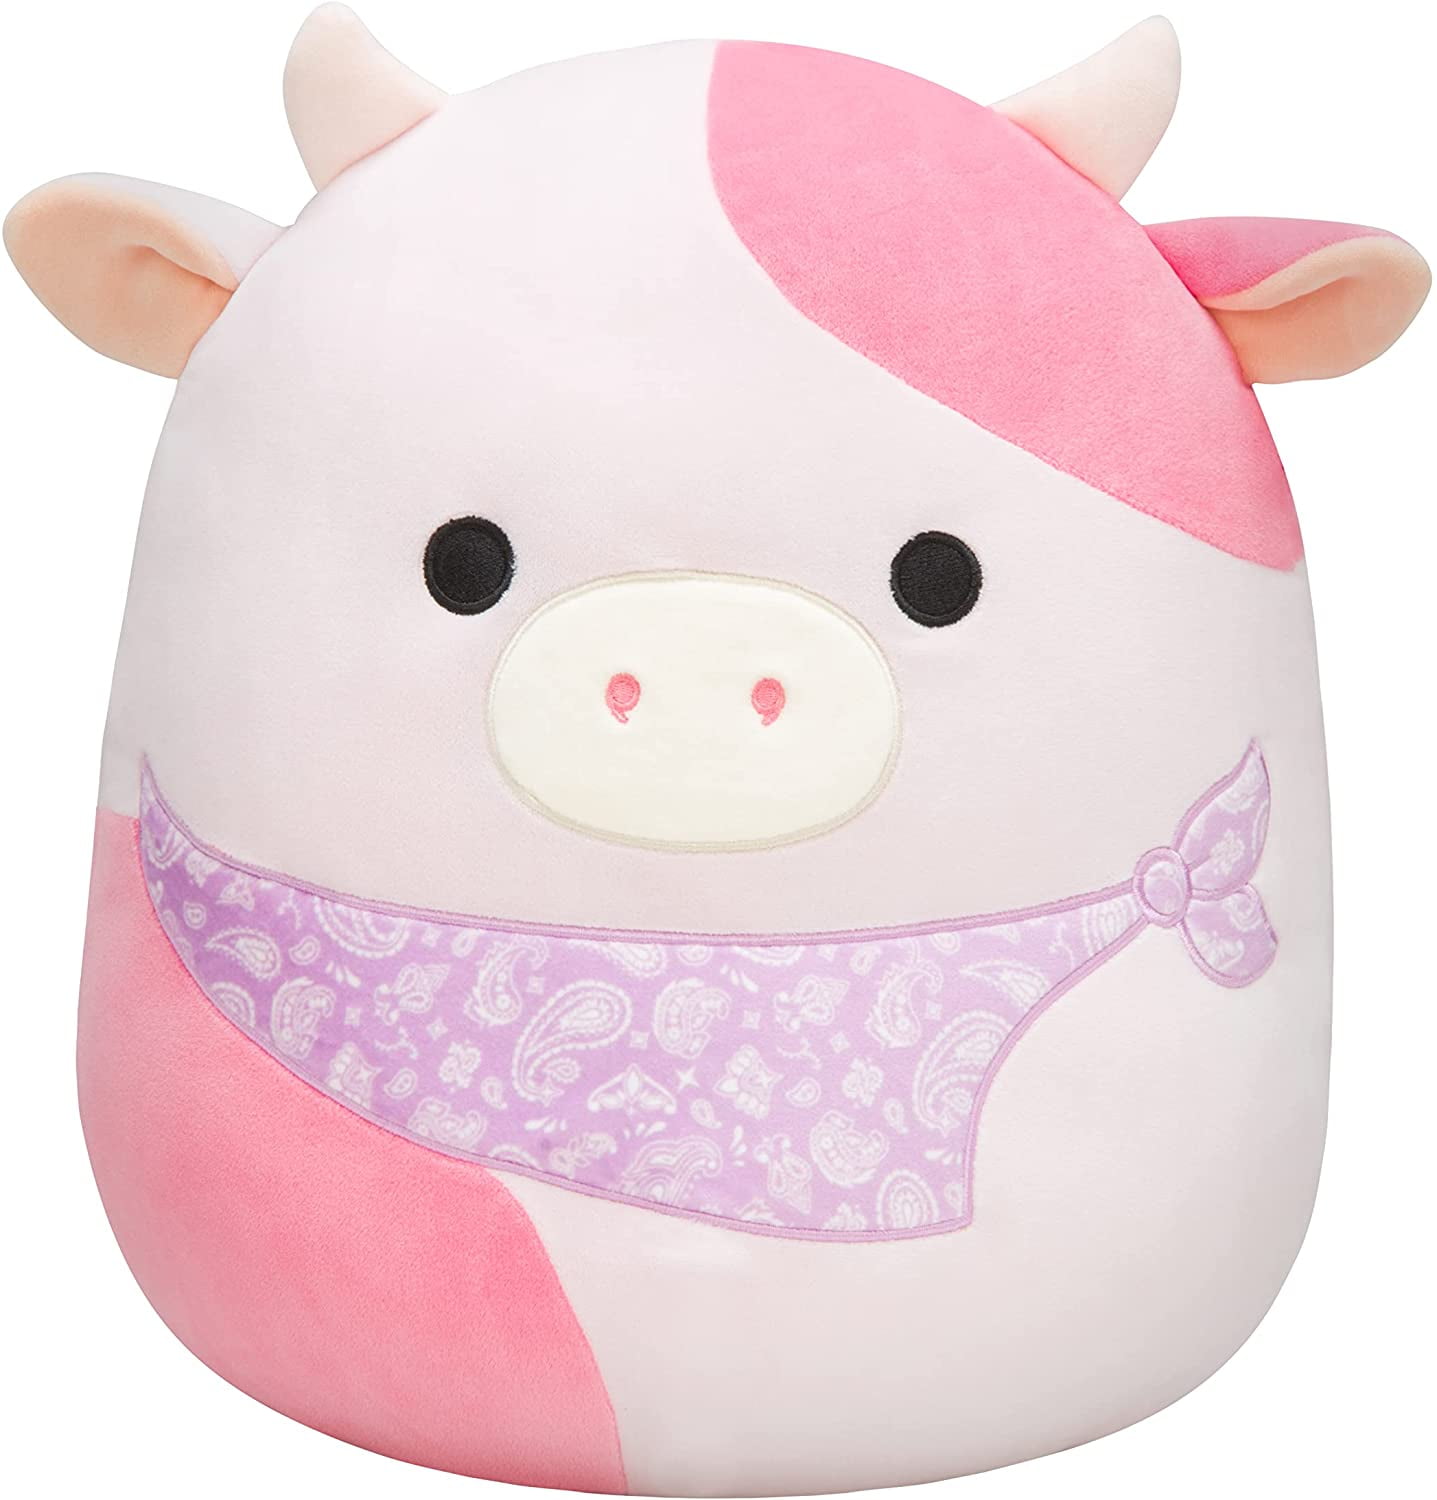 Squishmallow Plush Dolls Pillow Cow Stuffed Toy Kid Best Gift 